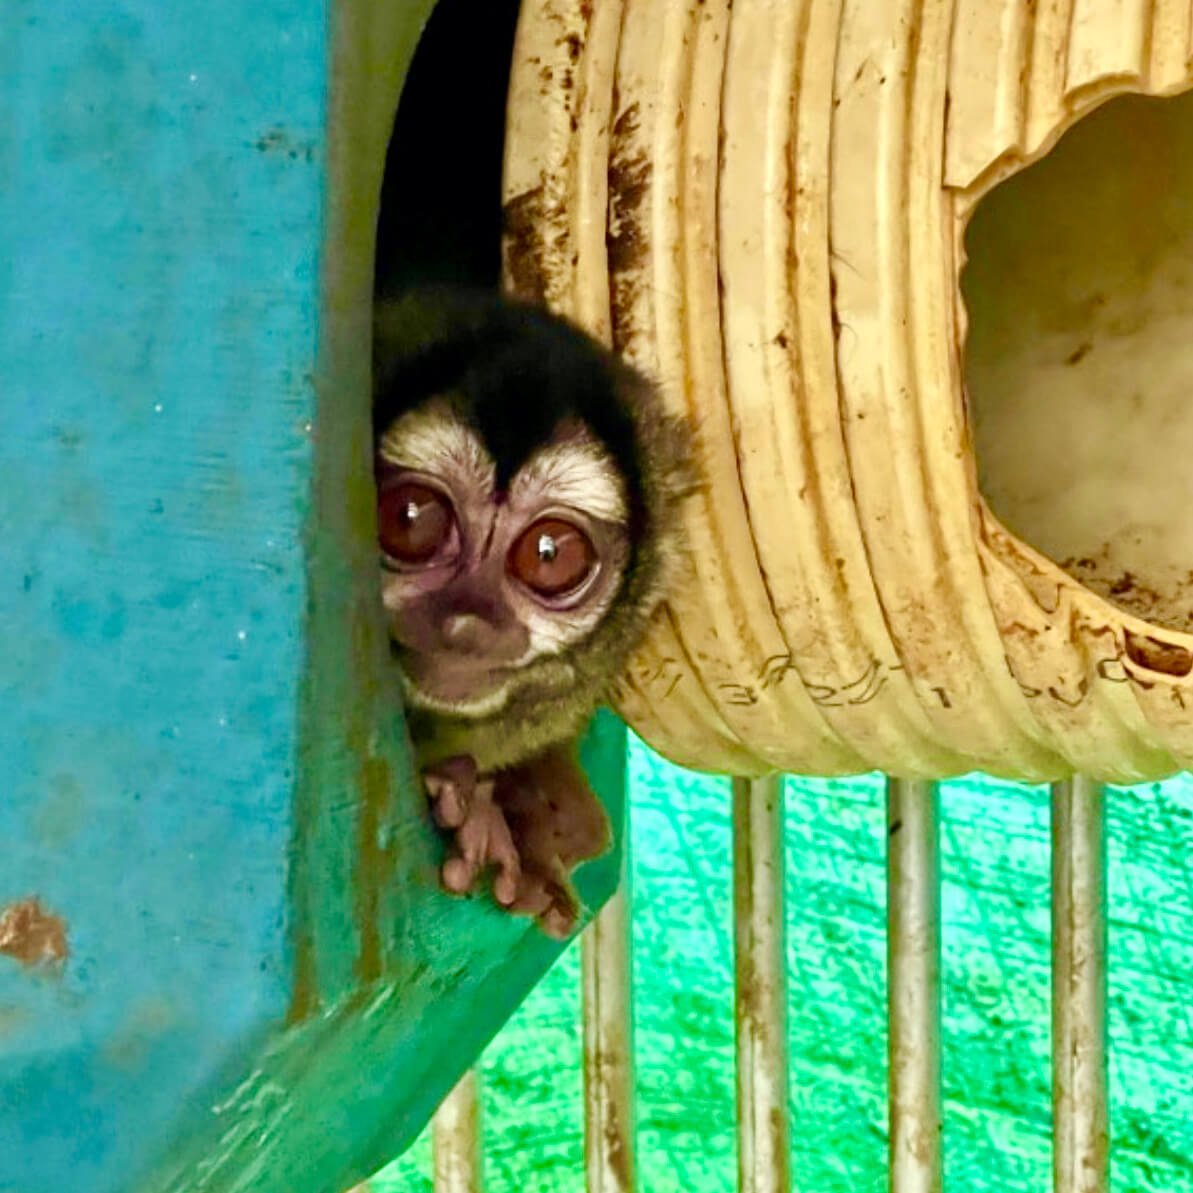 VIV Colombian Fundacion Centro de Primates FUCEP An Aotus monkey in a nest beside a soiled corrugated pipe also serving as a nest crop VS PO Colombian Council Member Wins ‘Courage in Leadership’ Award